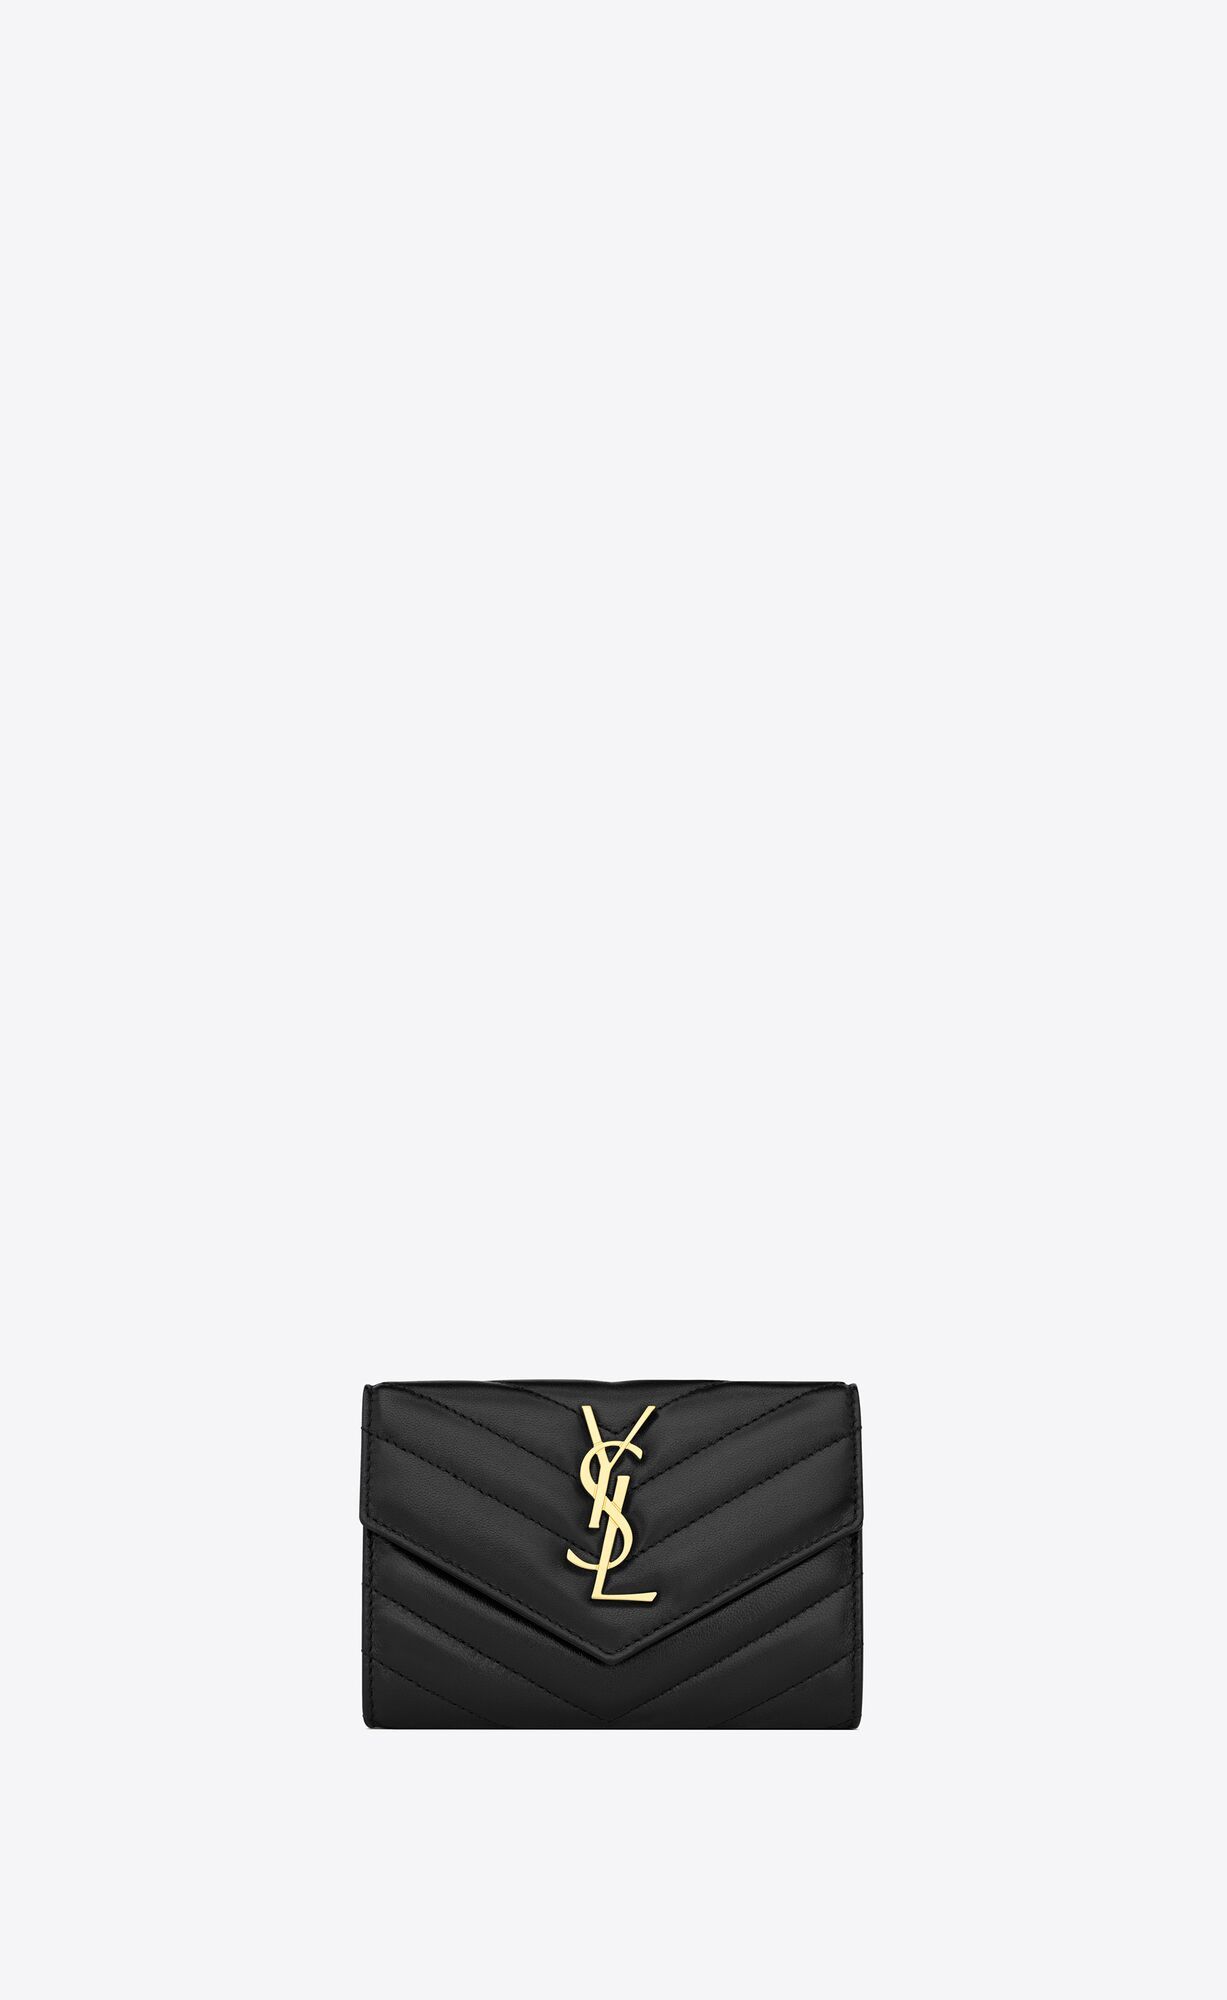 SMALL WALLET WITH FLAP decorated with THE CASSANDRE AND QUILTED OVERSTITCHING. | Saint Laurent Inc. (Global)